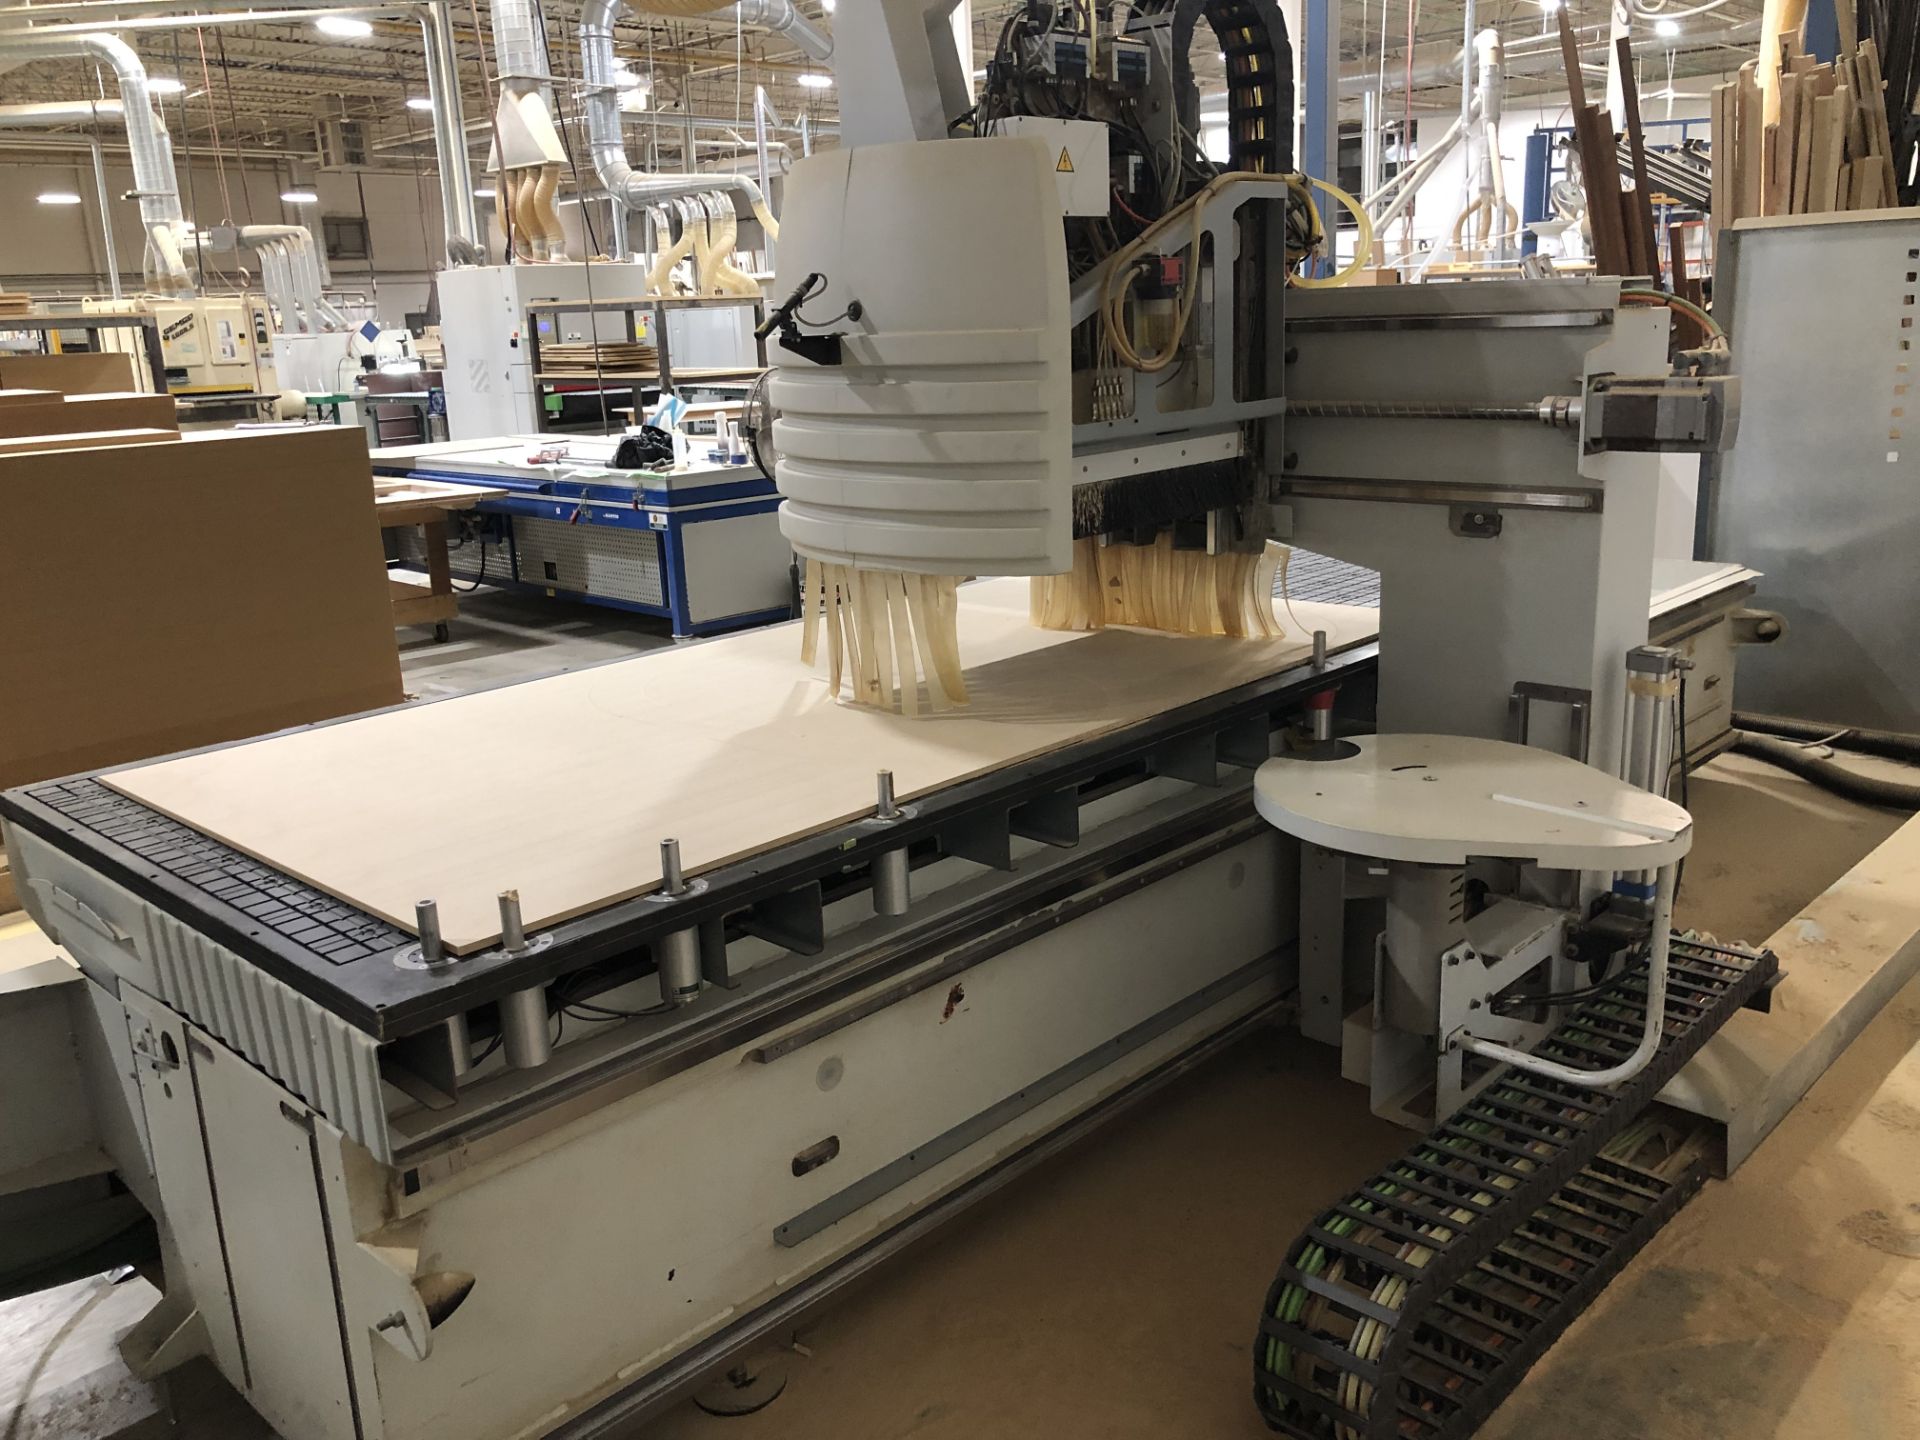 2006 Holz-Her Pro-Master 7123 Flat Table CNC - Image 4 of 13